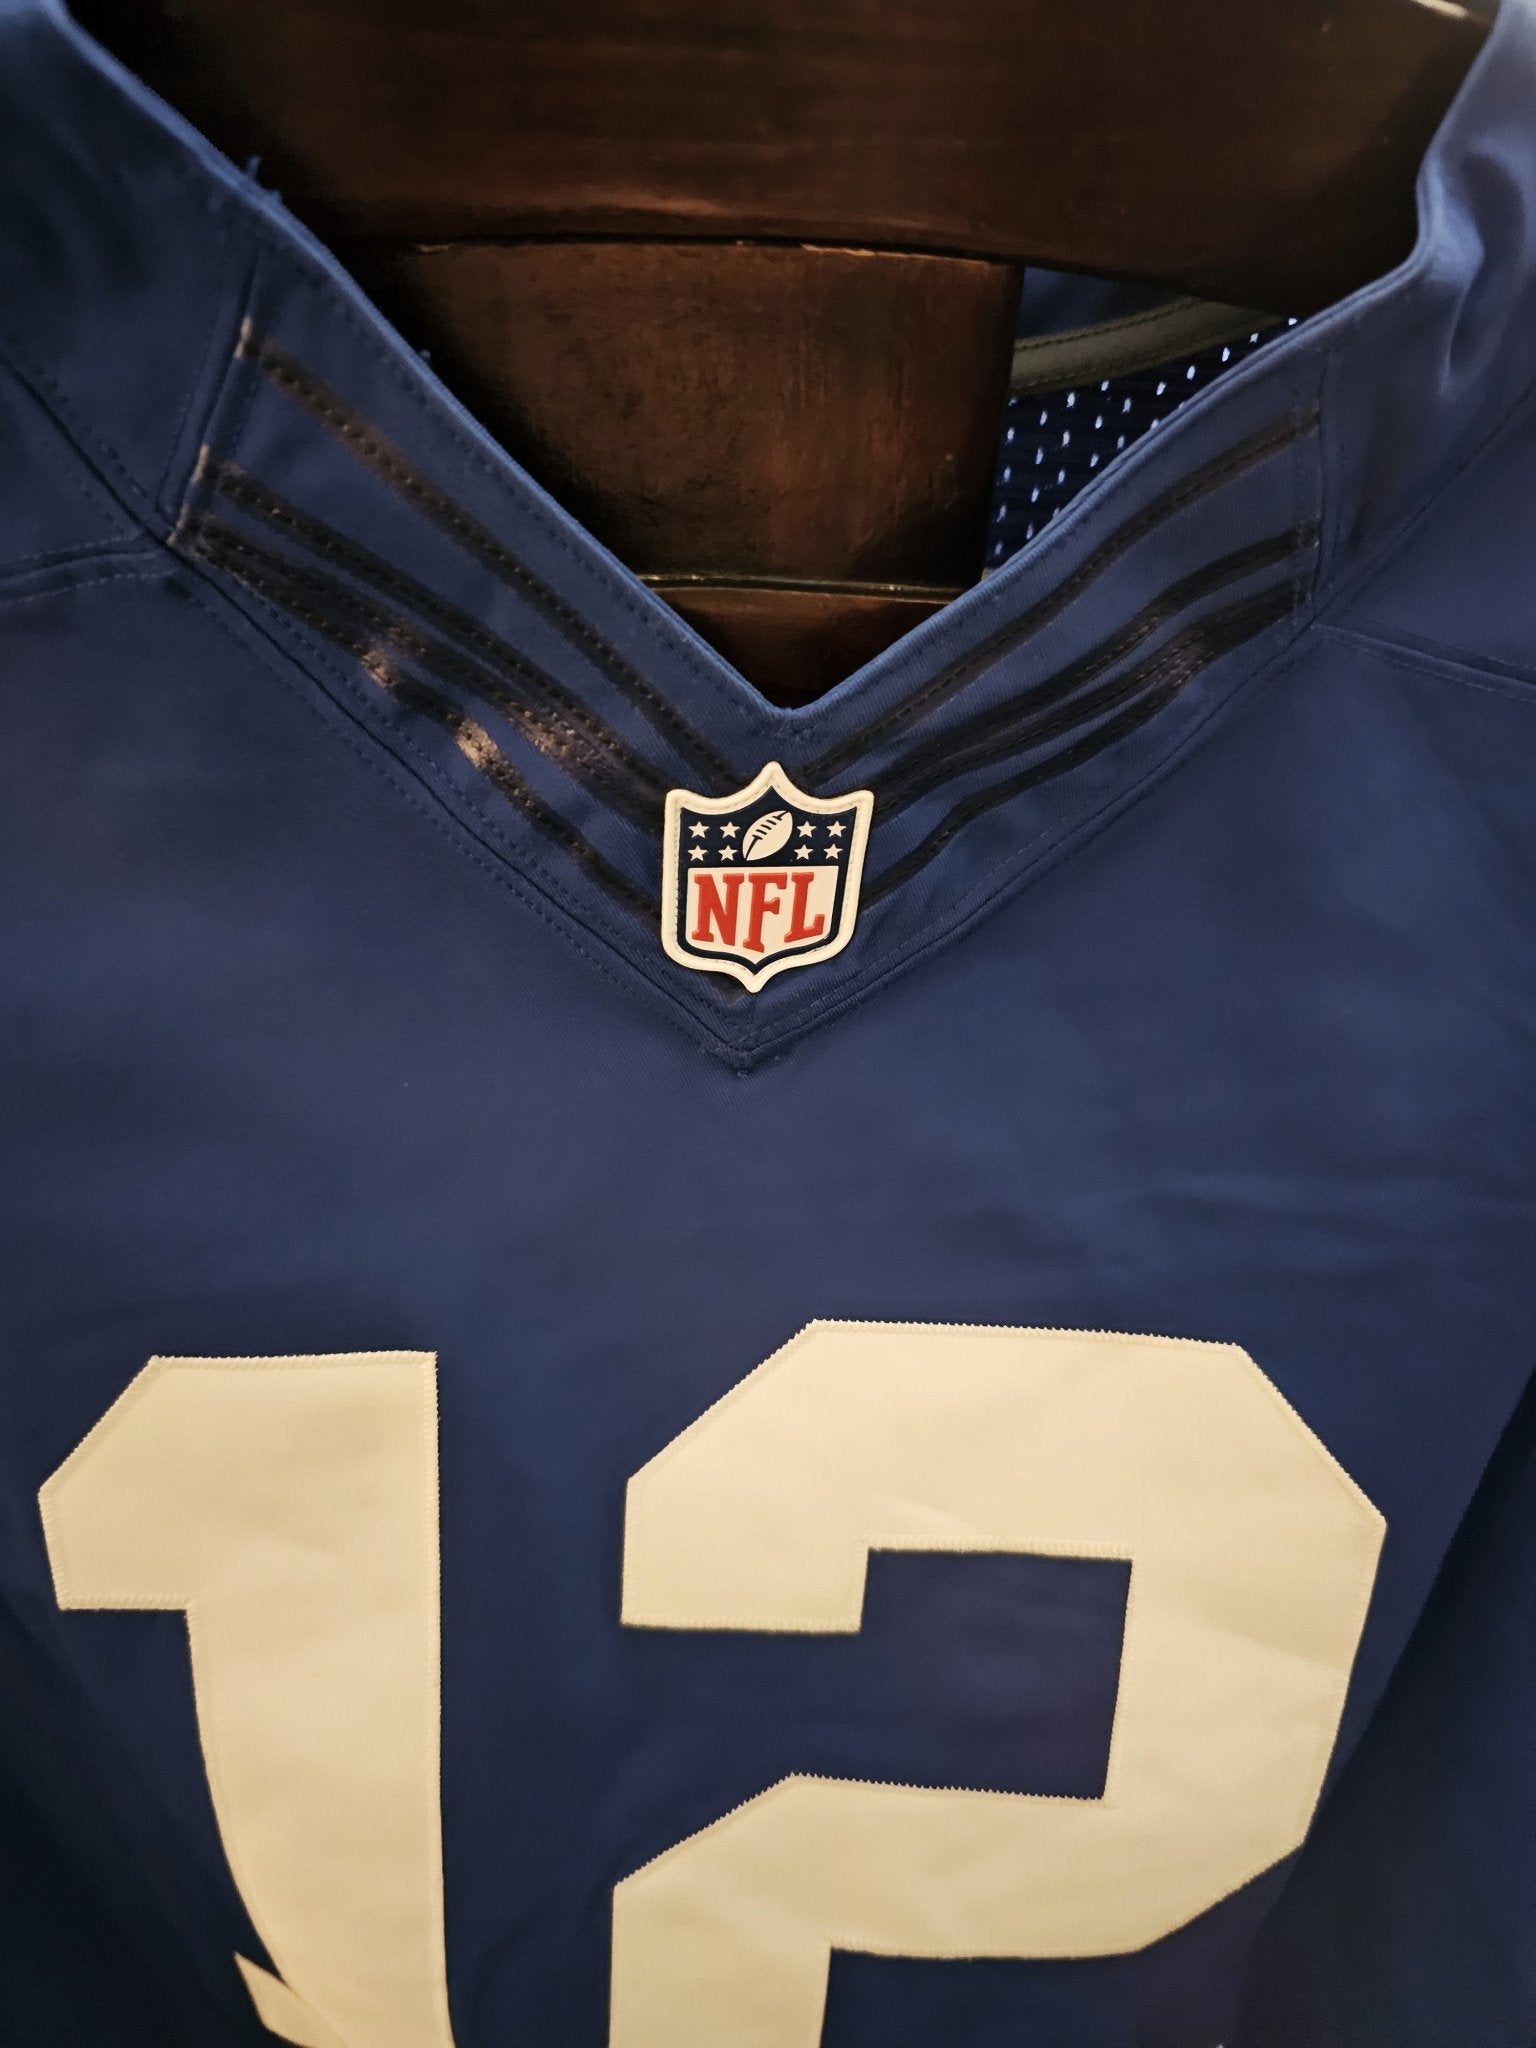 Nike - NFL | Men's Nike On Field Andrew Luck Indianapolis Colts Sewn Authentic Jersey | sz. 52 - NFL Jersey - Steady Bunny Shop